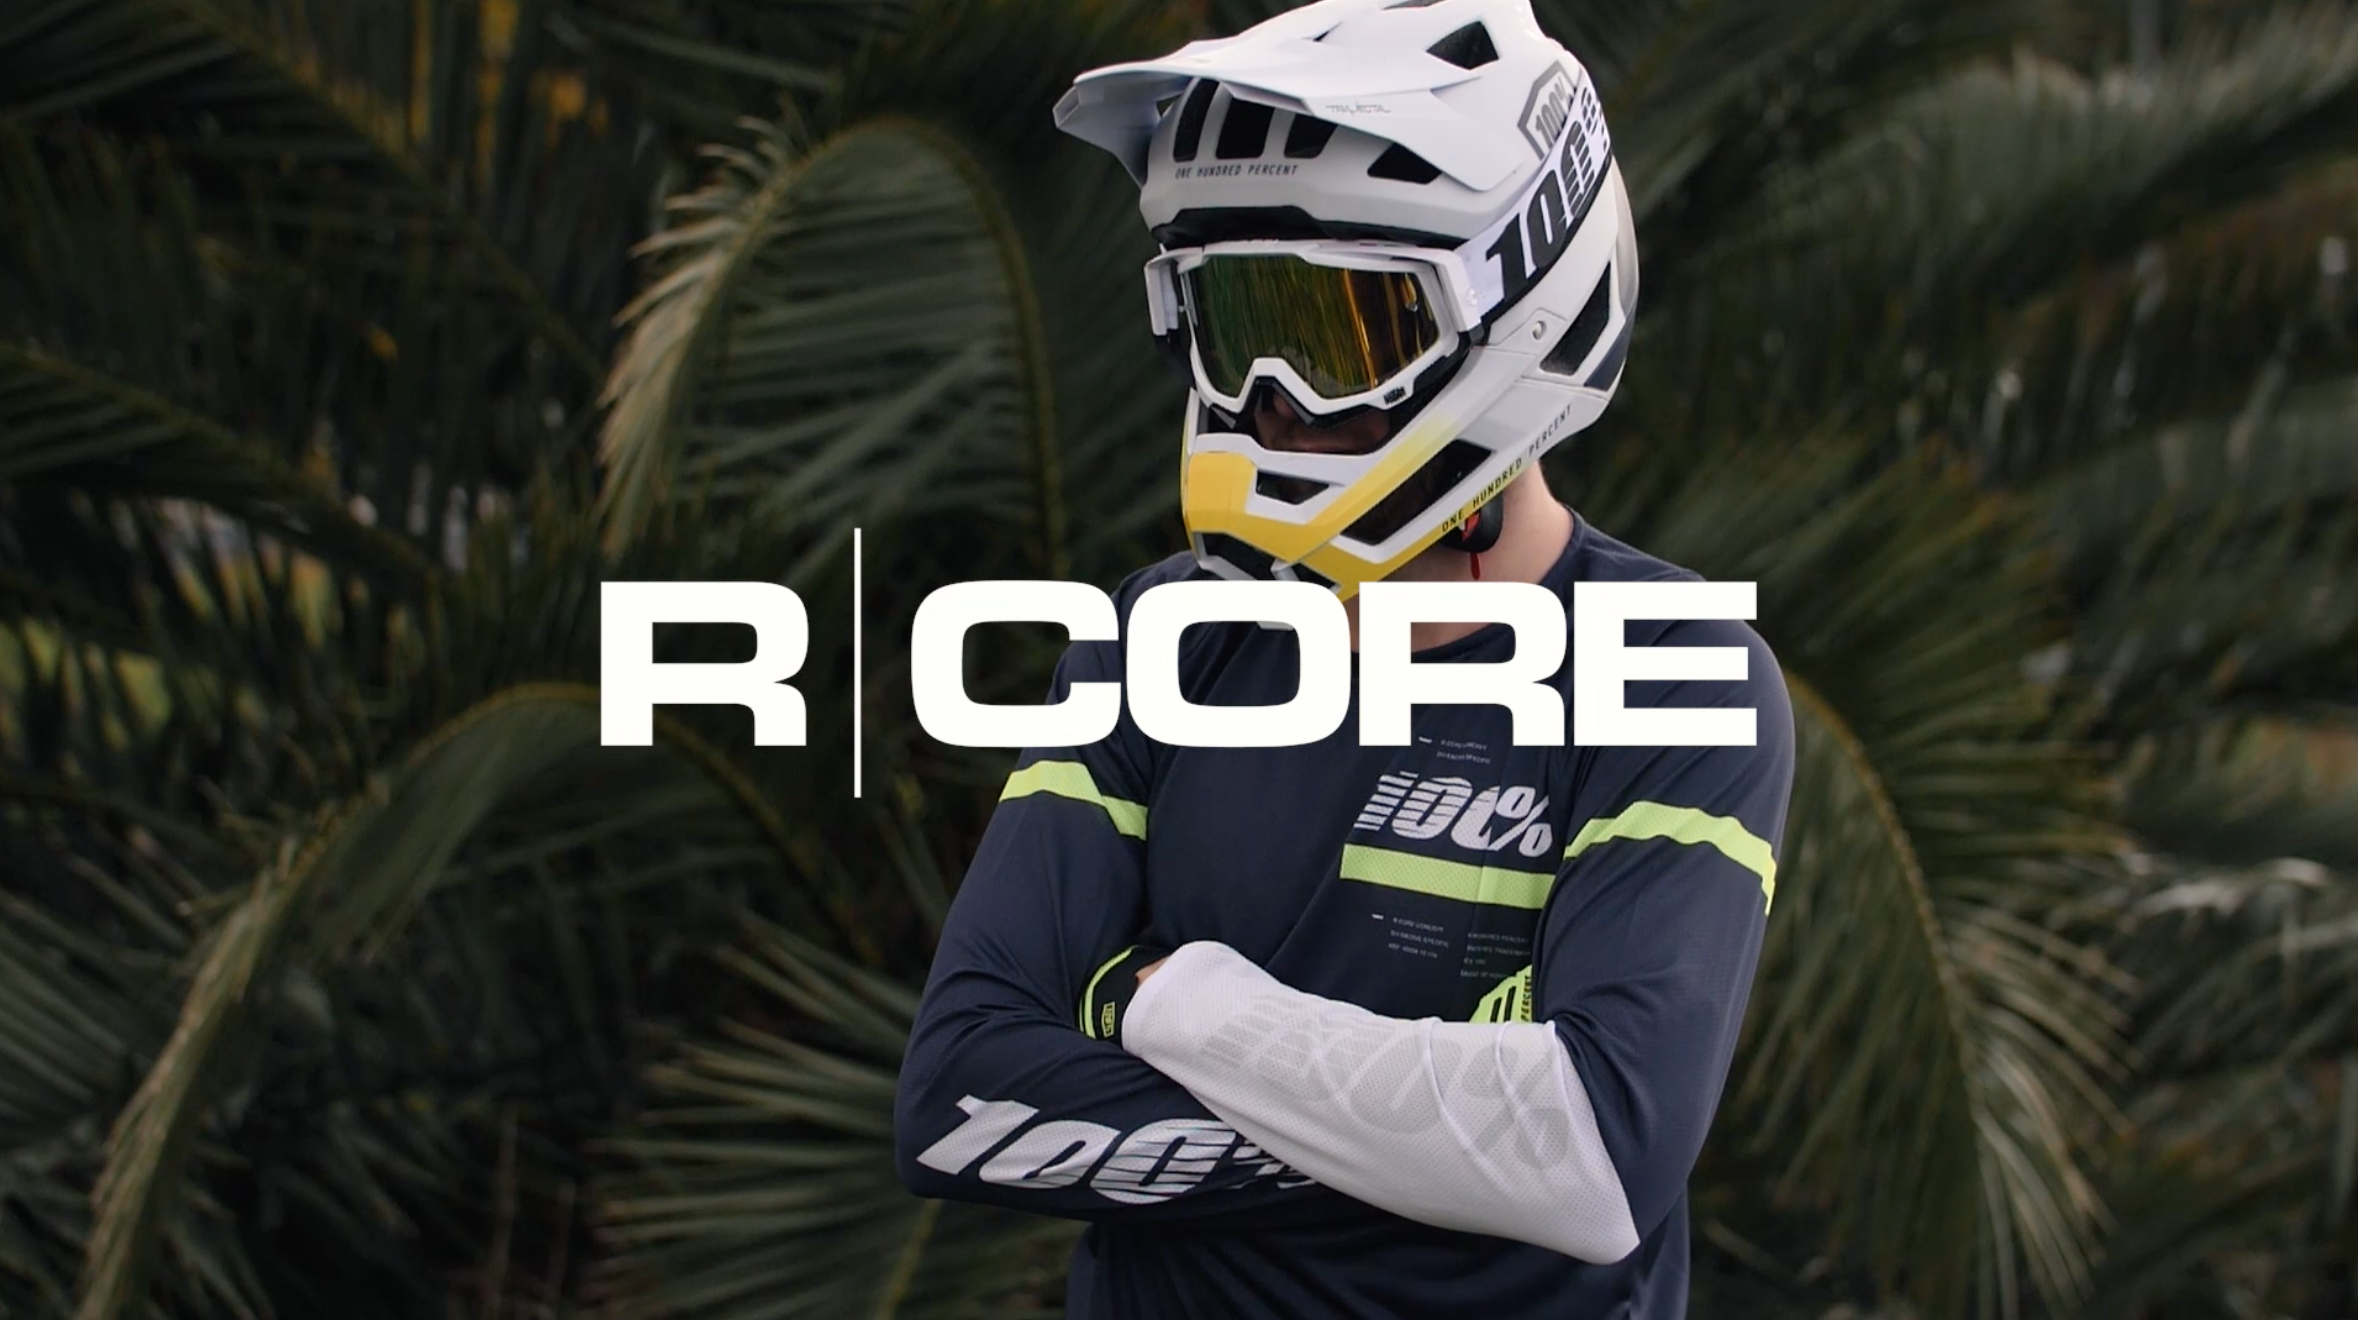 R-Core Downhill and BMX Gear